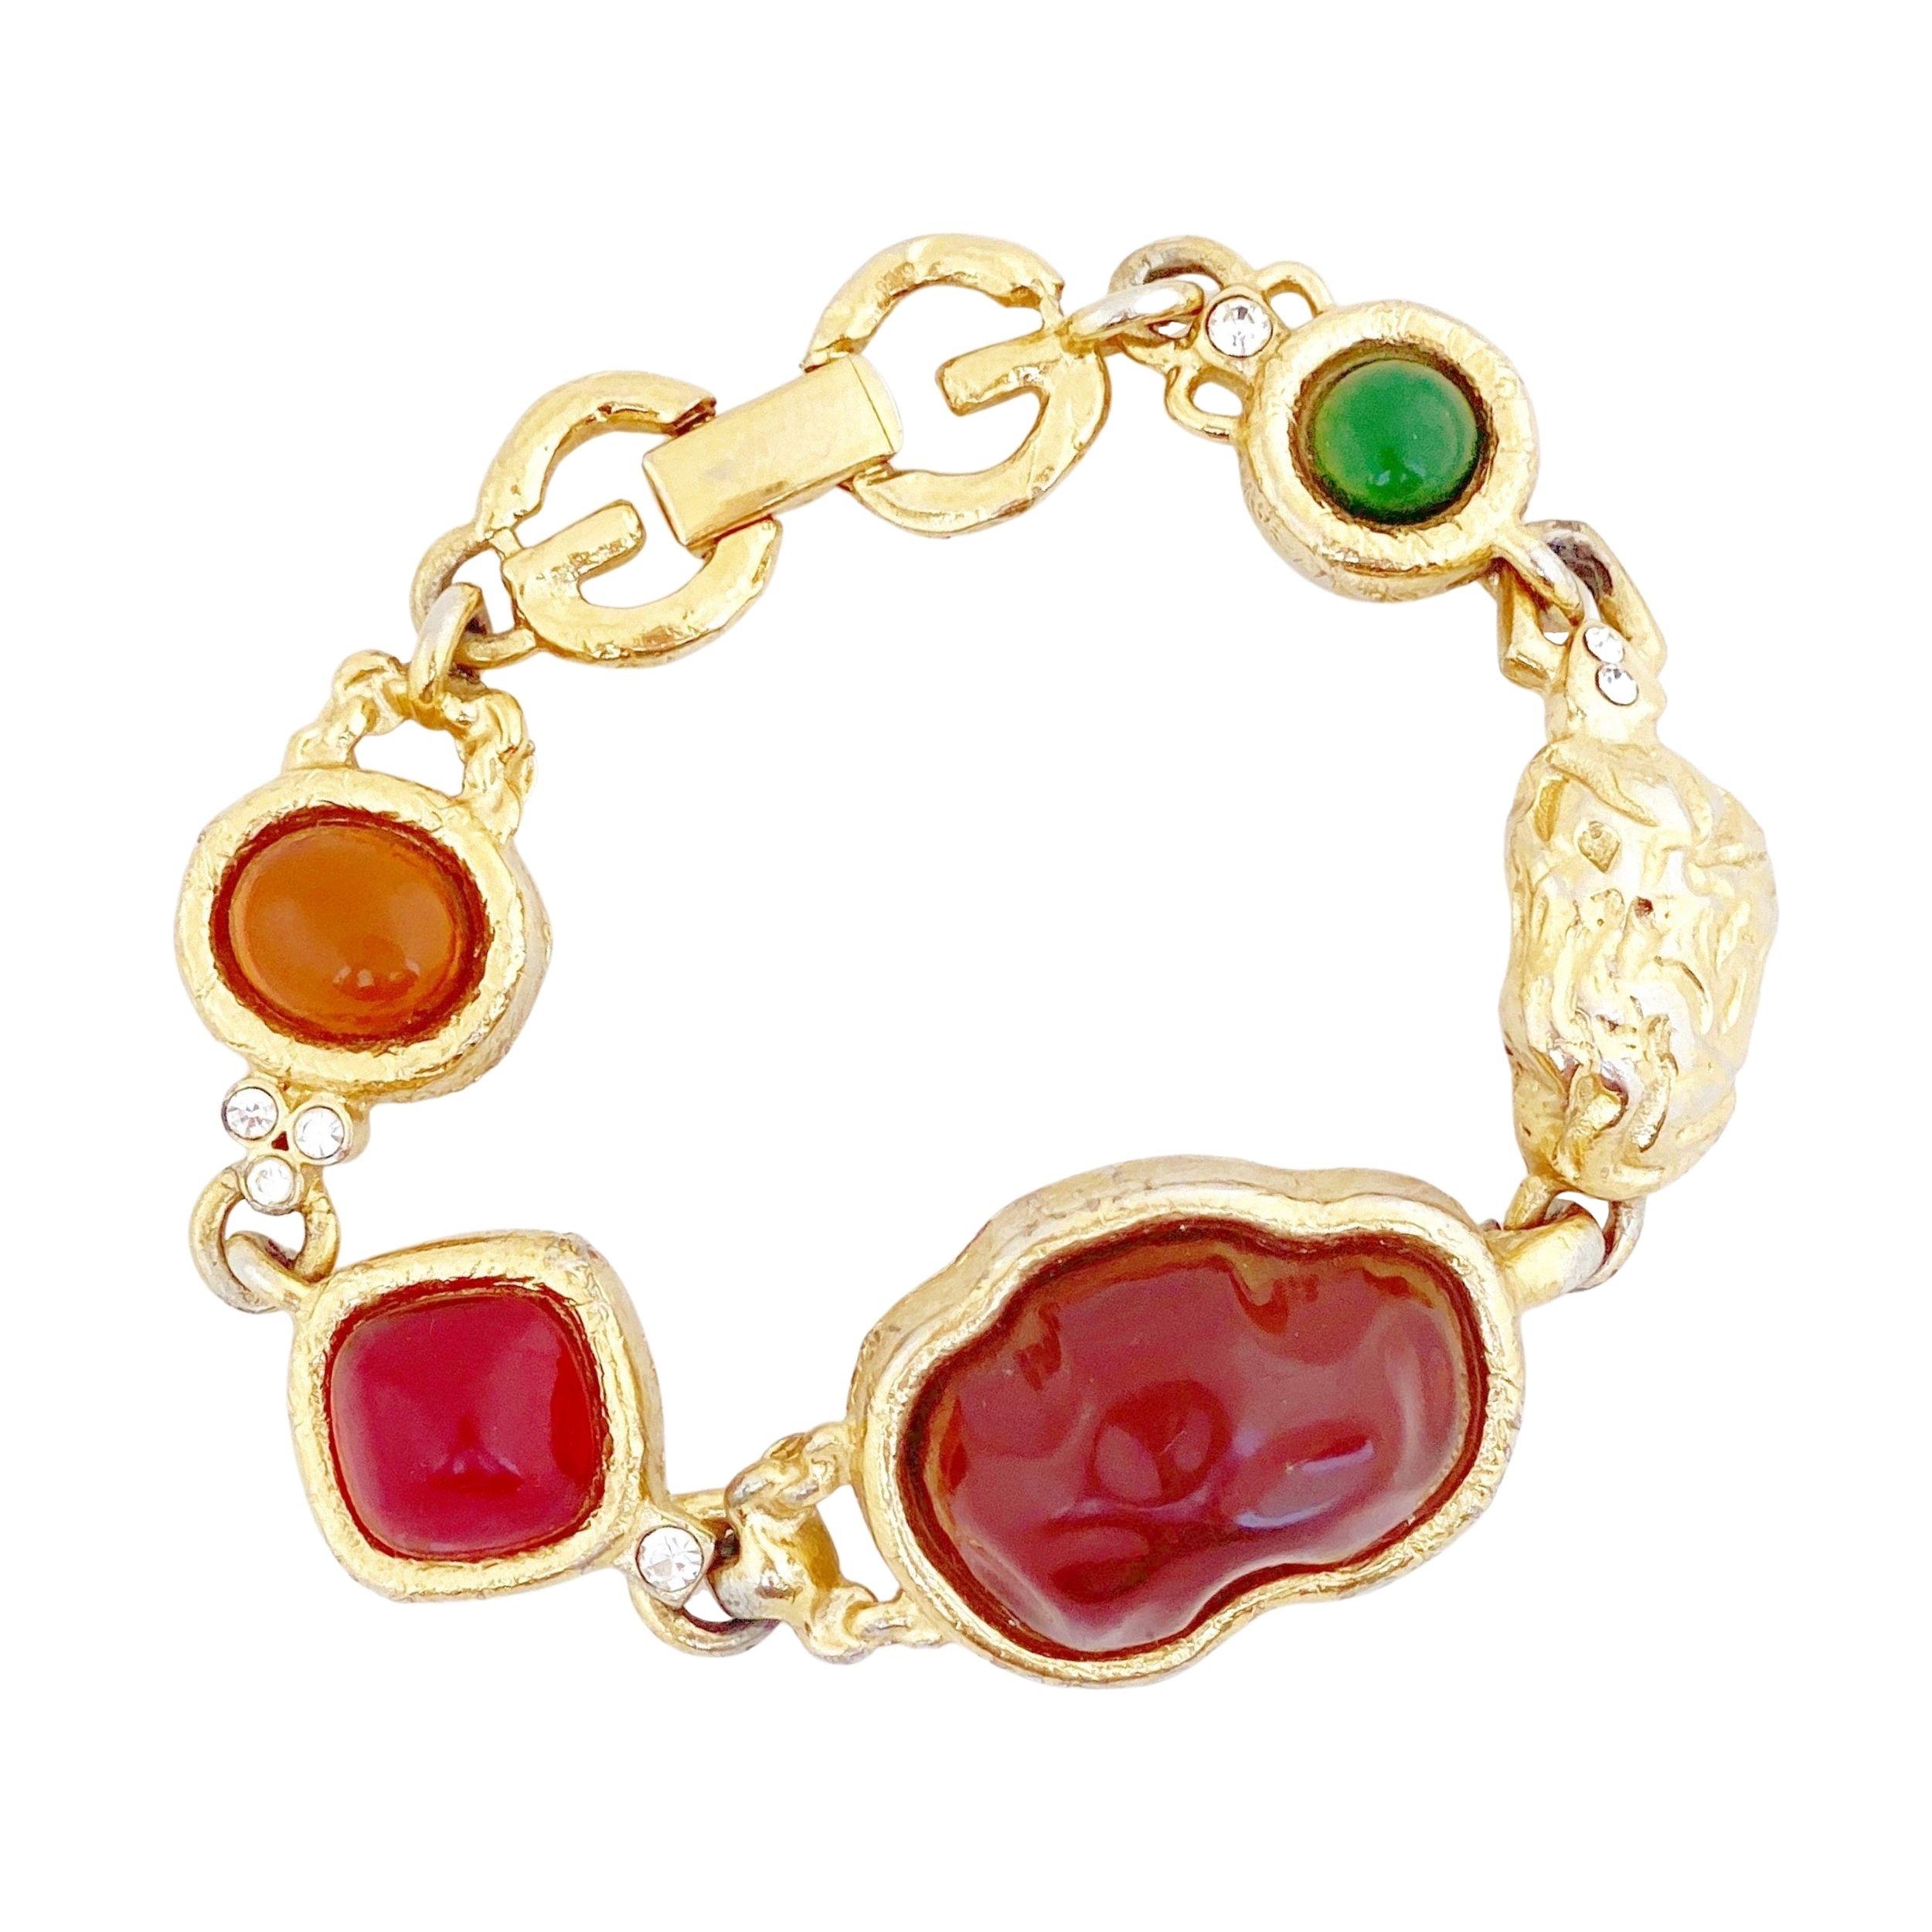 Gold & Resin Cabochon Organic Link Bracelet With Logo Clasp By Givenchy, 1980s